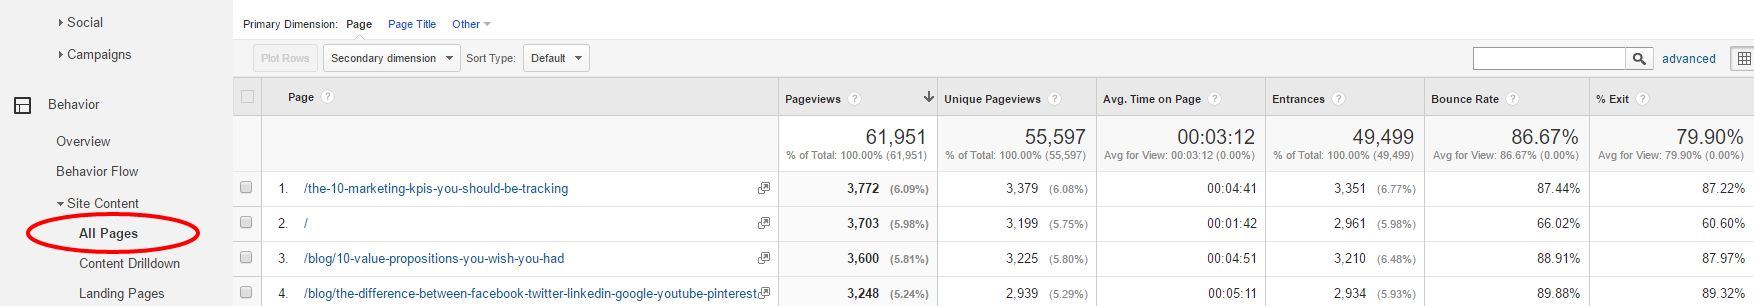 bounce rate time on page pageviews